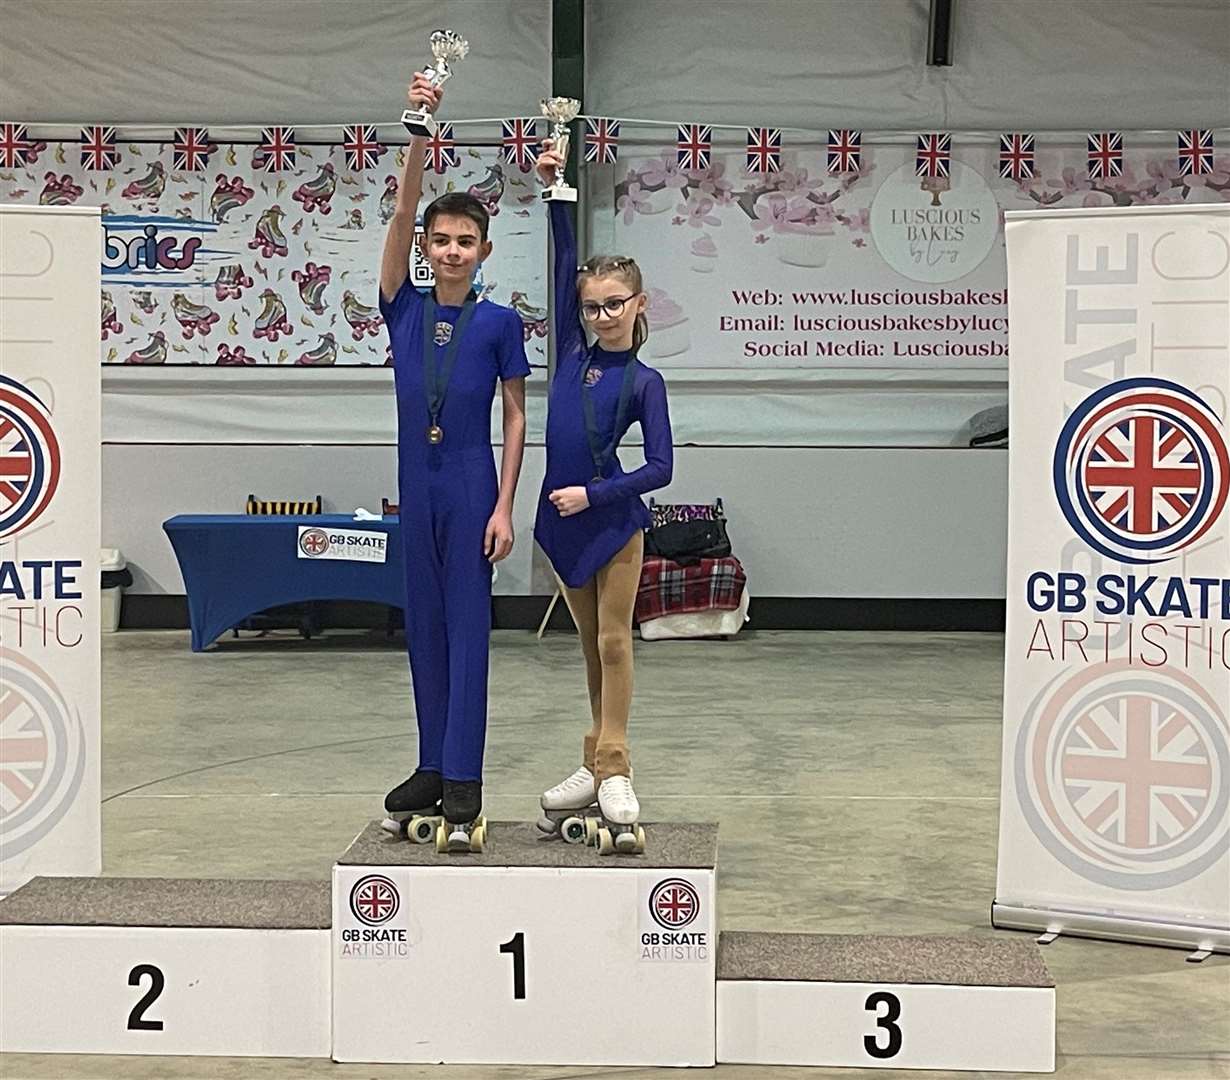 There was a first-placed finish for Lewis Hackman and Lucia Fairbrass in the elementary and preliminary couples’ event